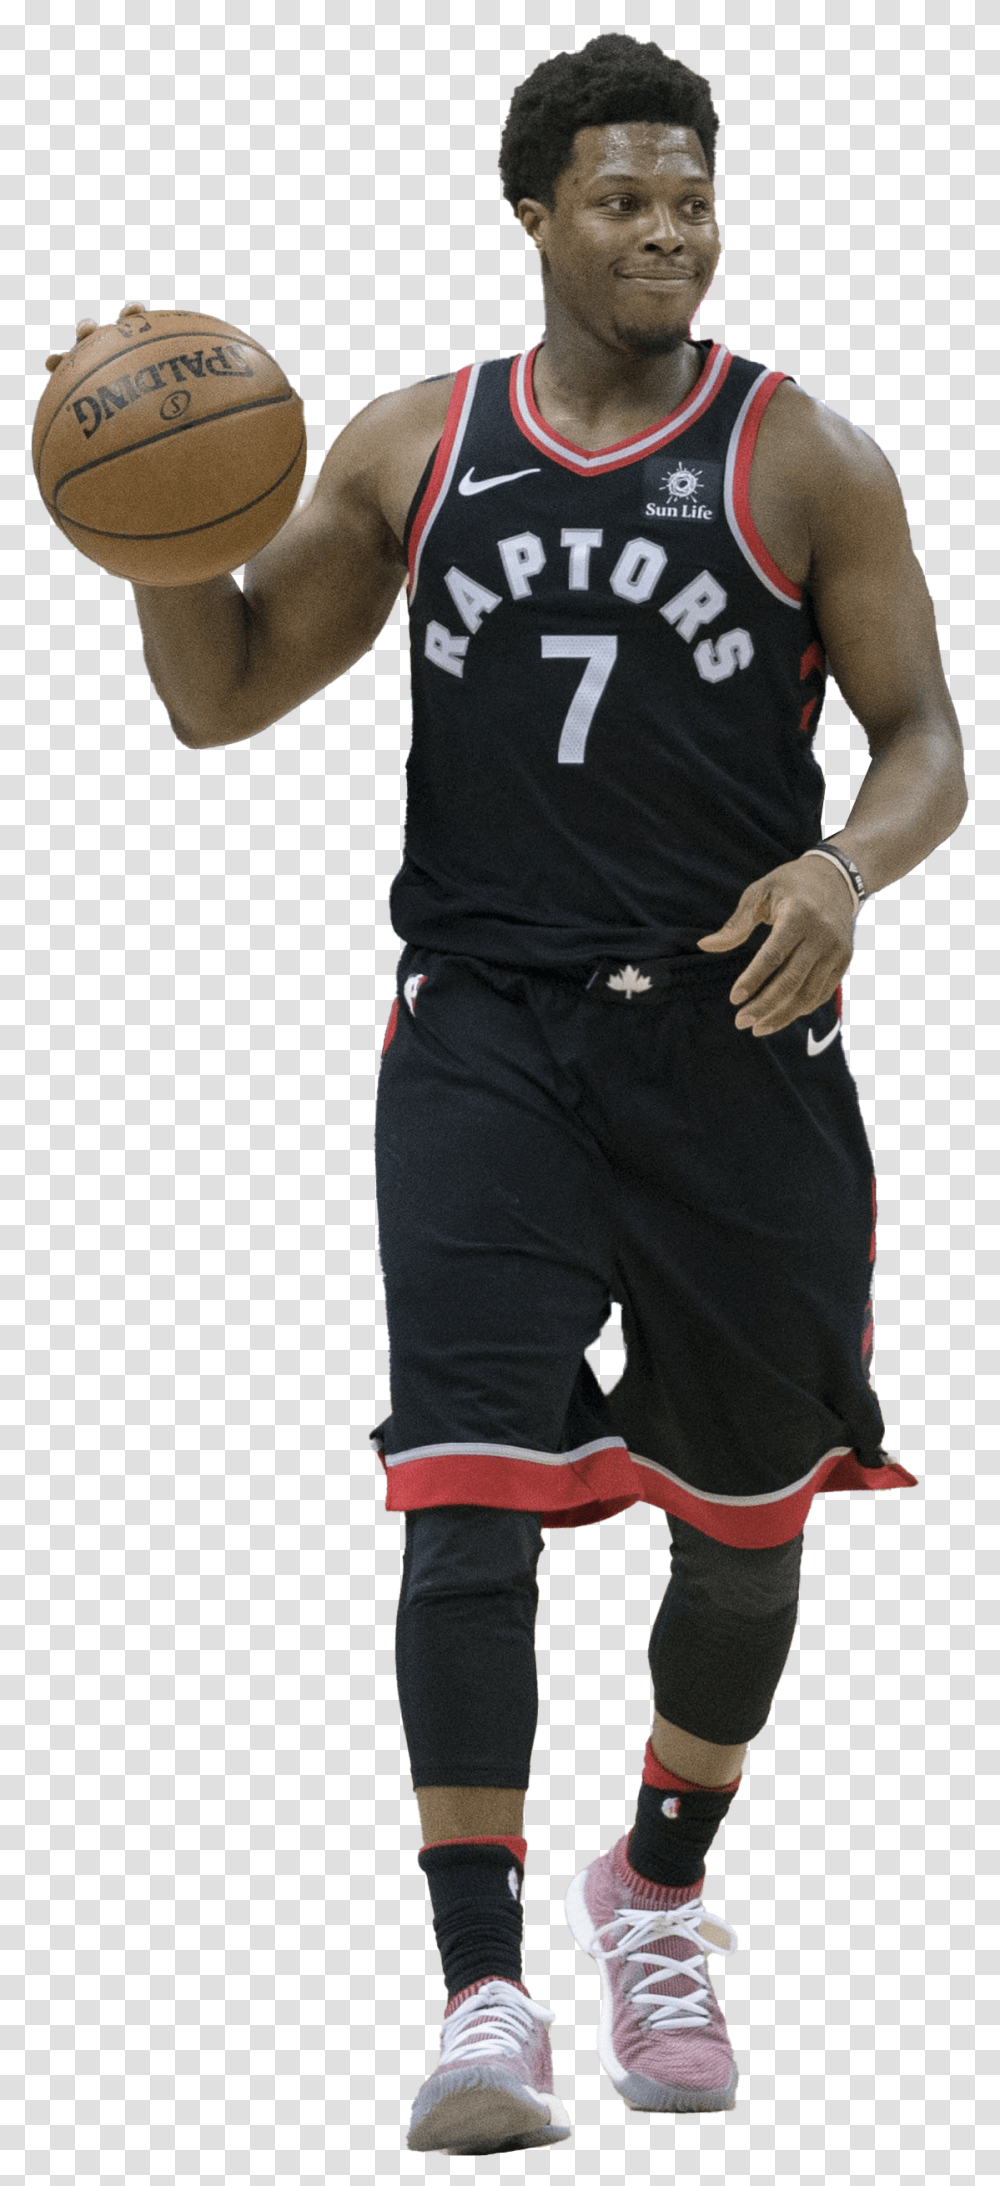 Kyle Lowry Background Background Nba Player, Person, People, Team Sport Transparent Png